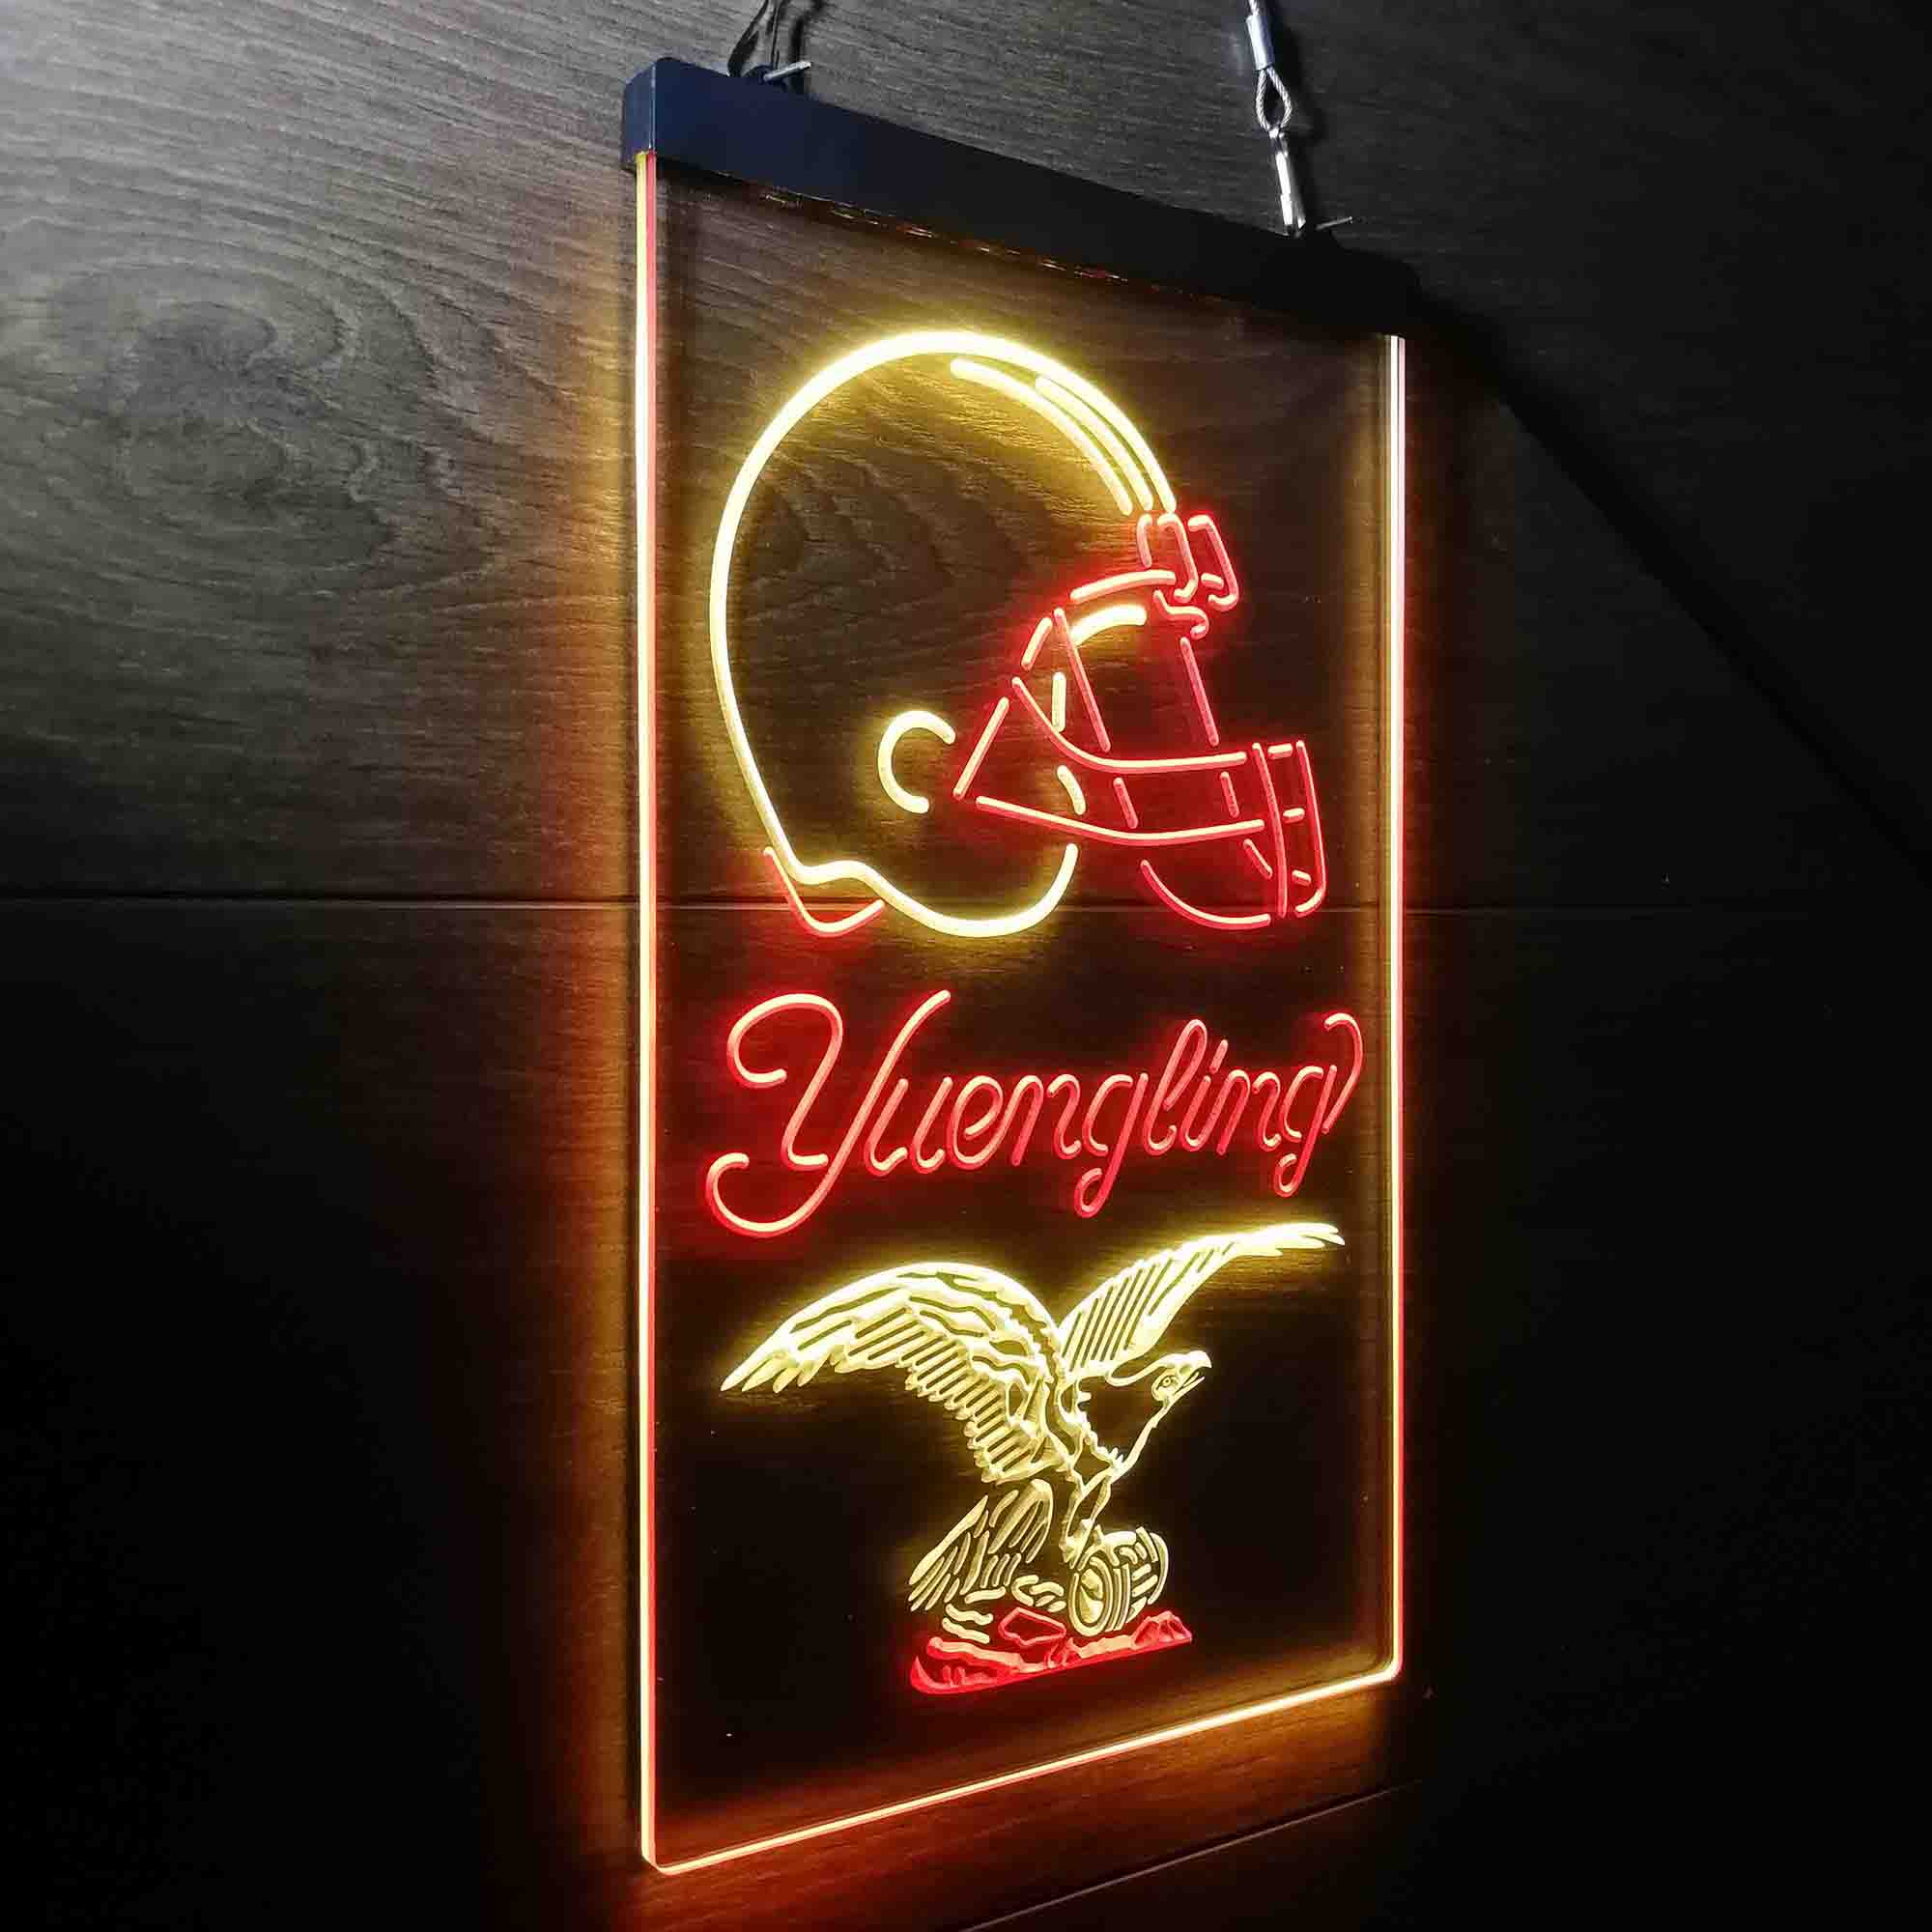 Yuengling Bar Cleveland Browns Est. 1946 LED Neon Sign